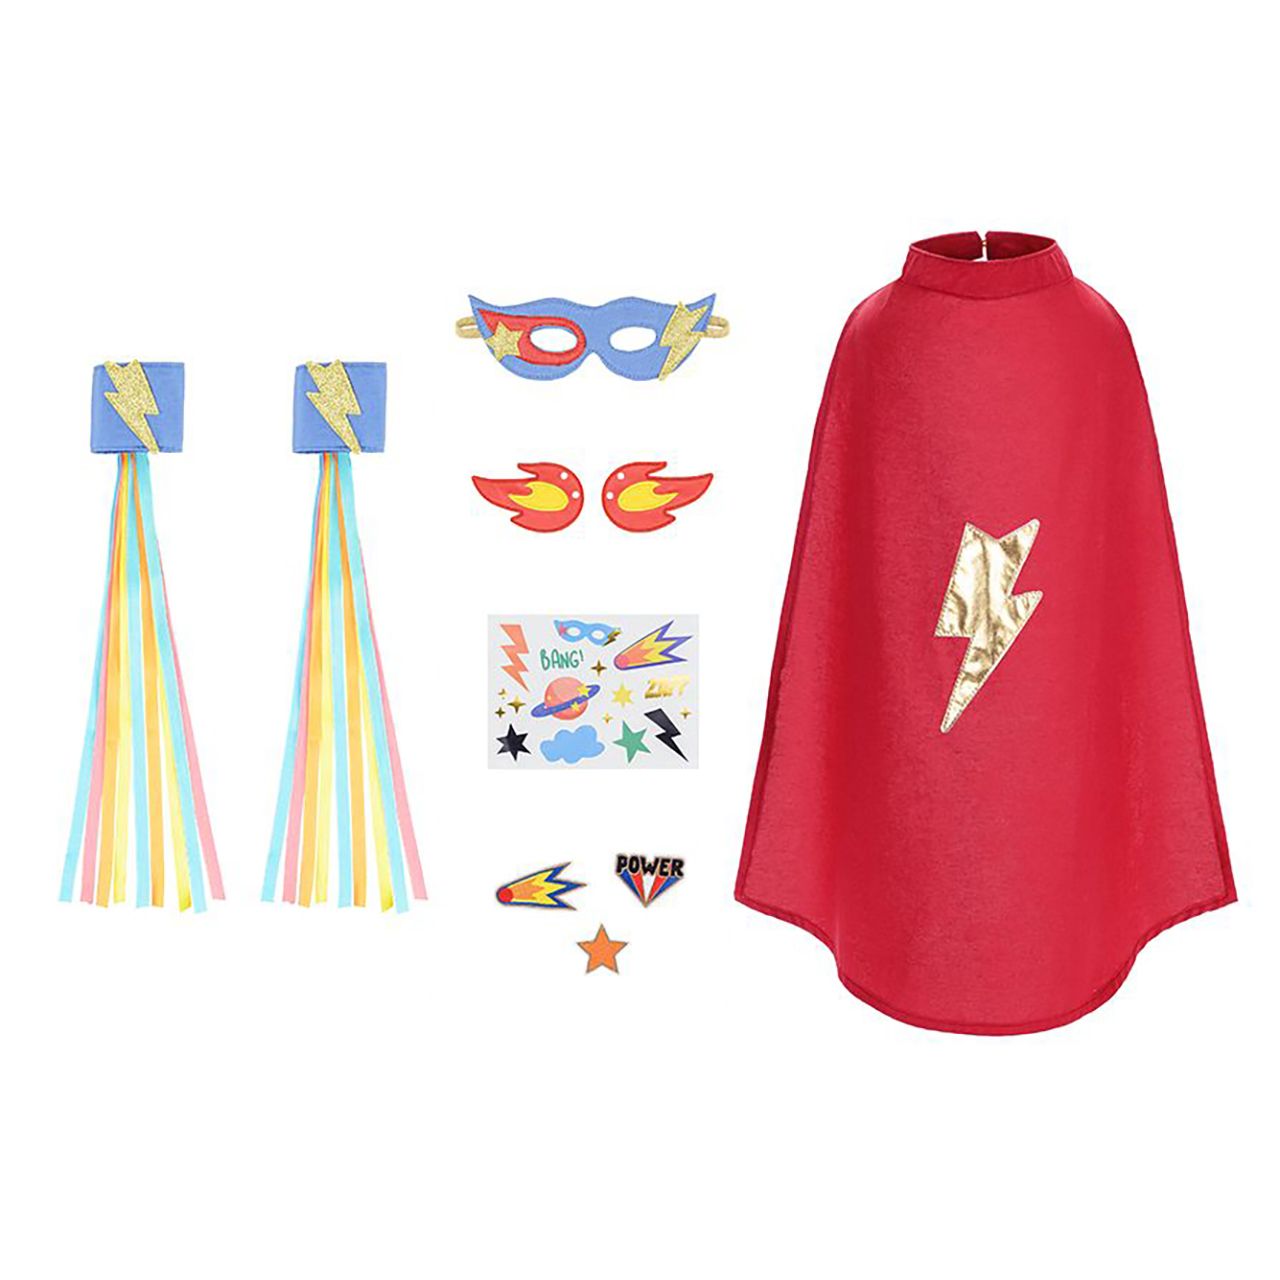 Partydeco: disguise in a Superhero suitcase